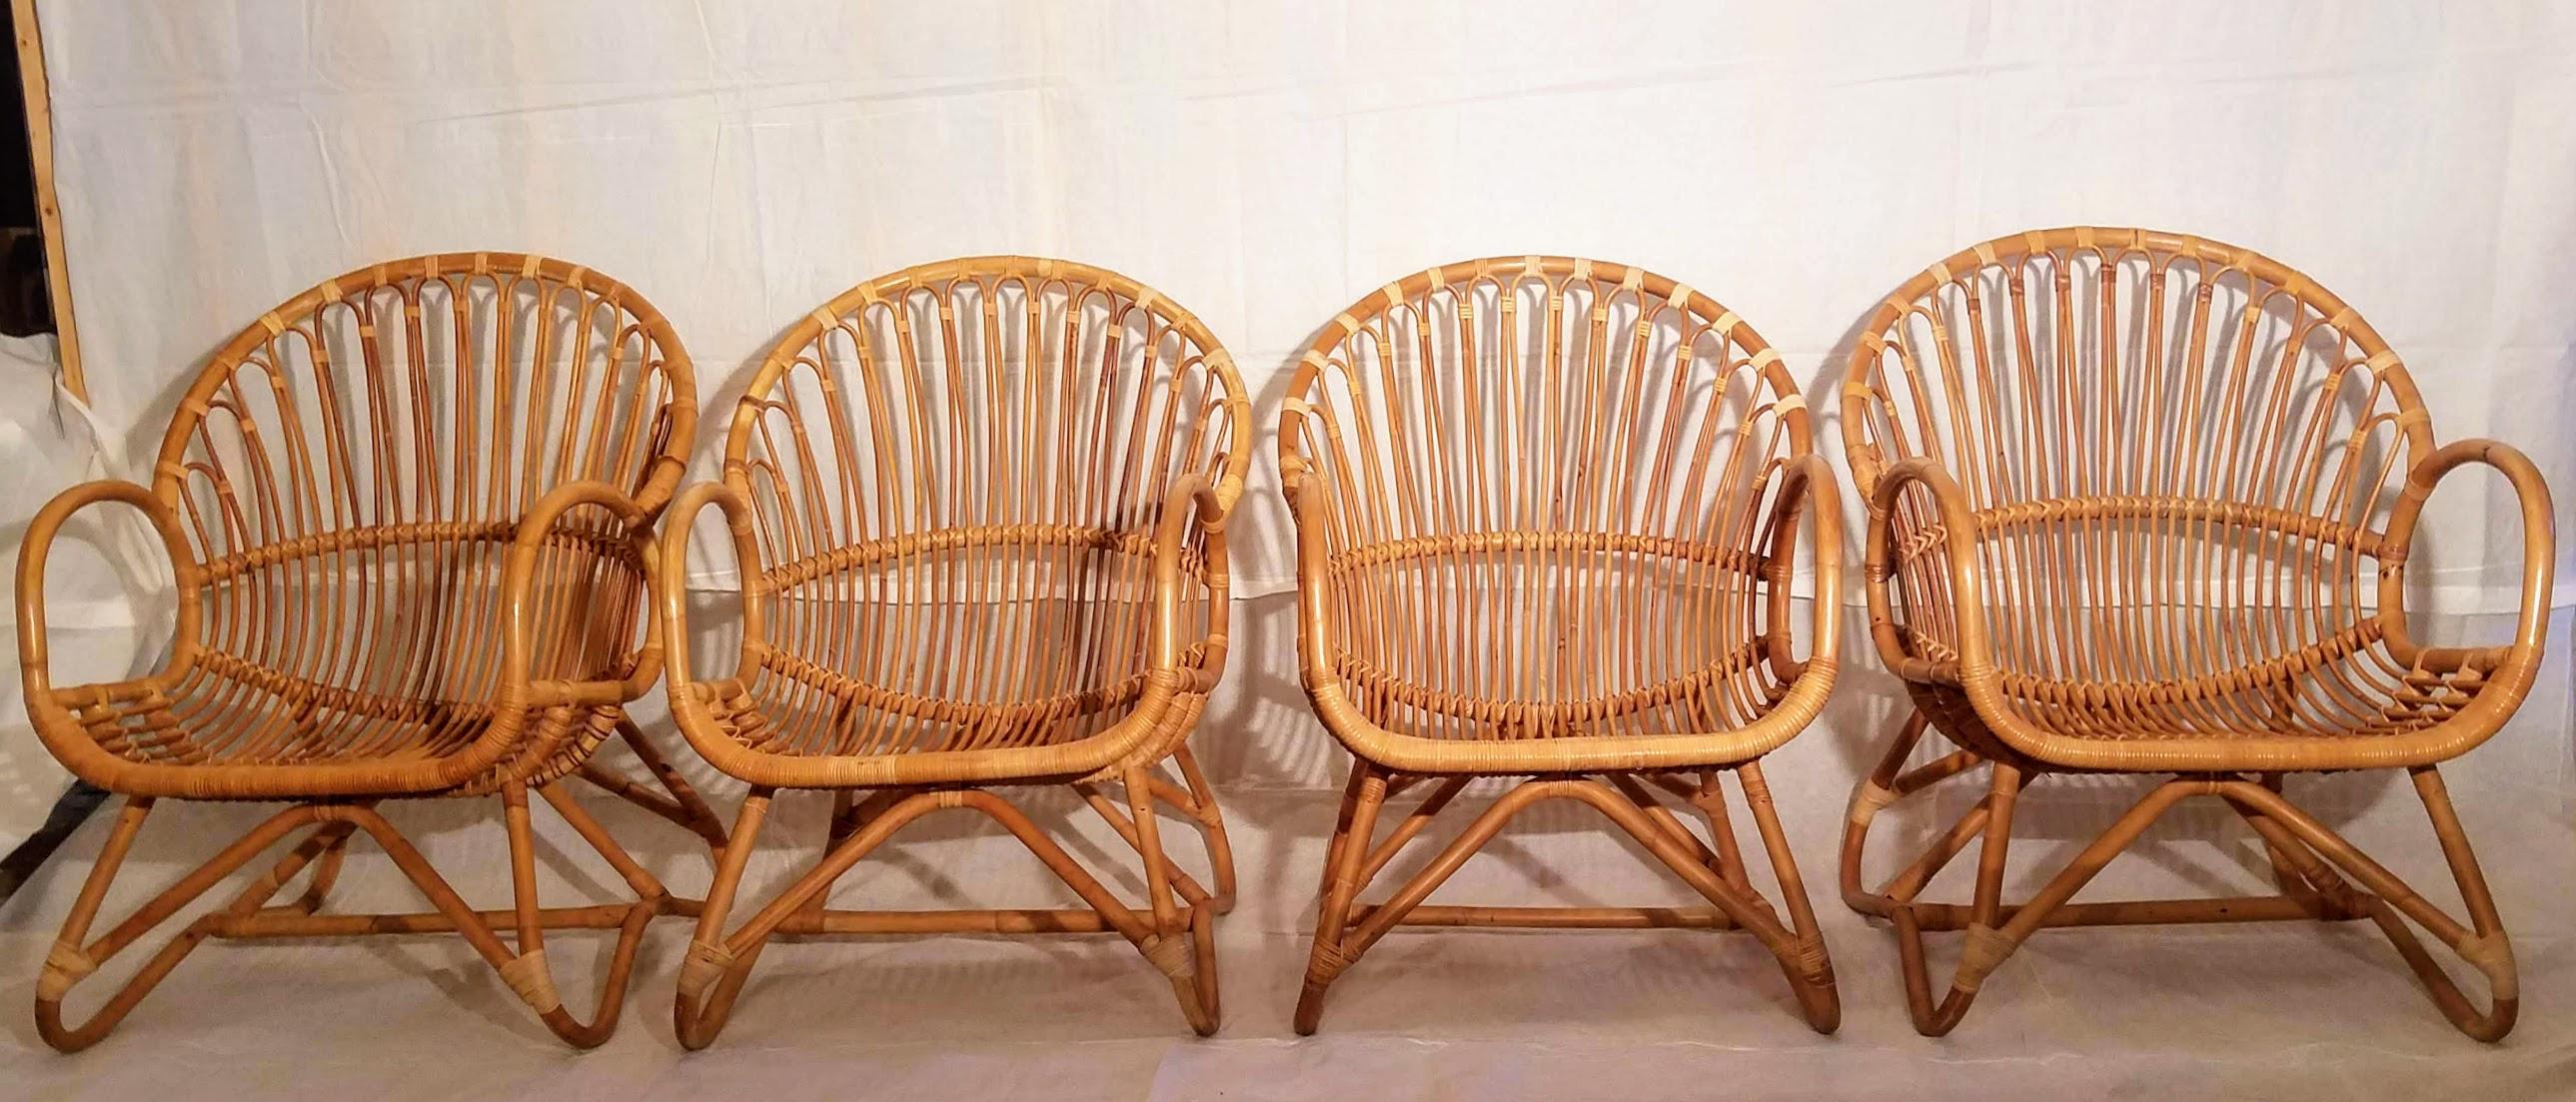 Hand-Woven Four Rattan Lounge Chairs with Center Table Dirk van Sliedregt, 1960s